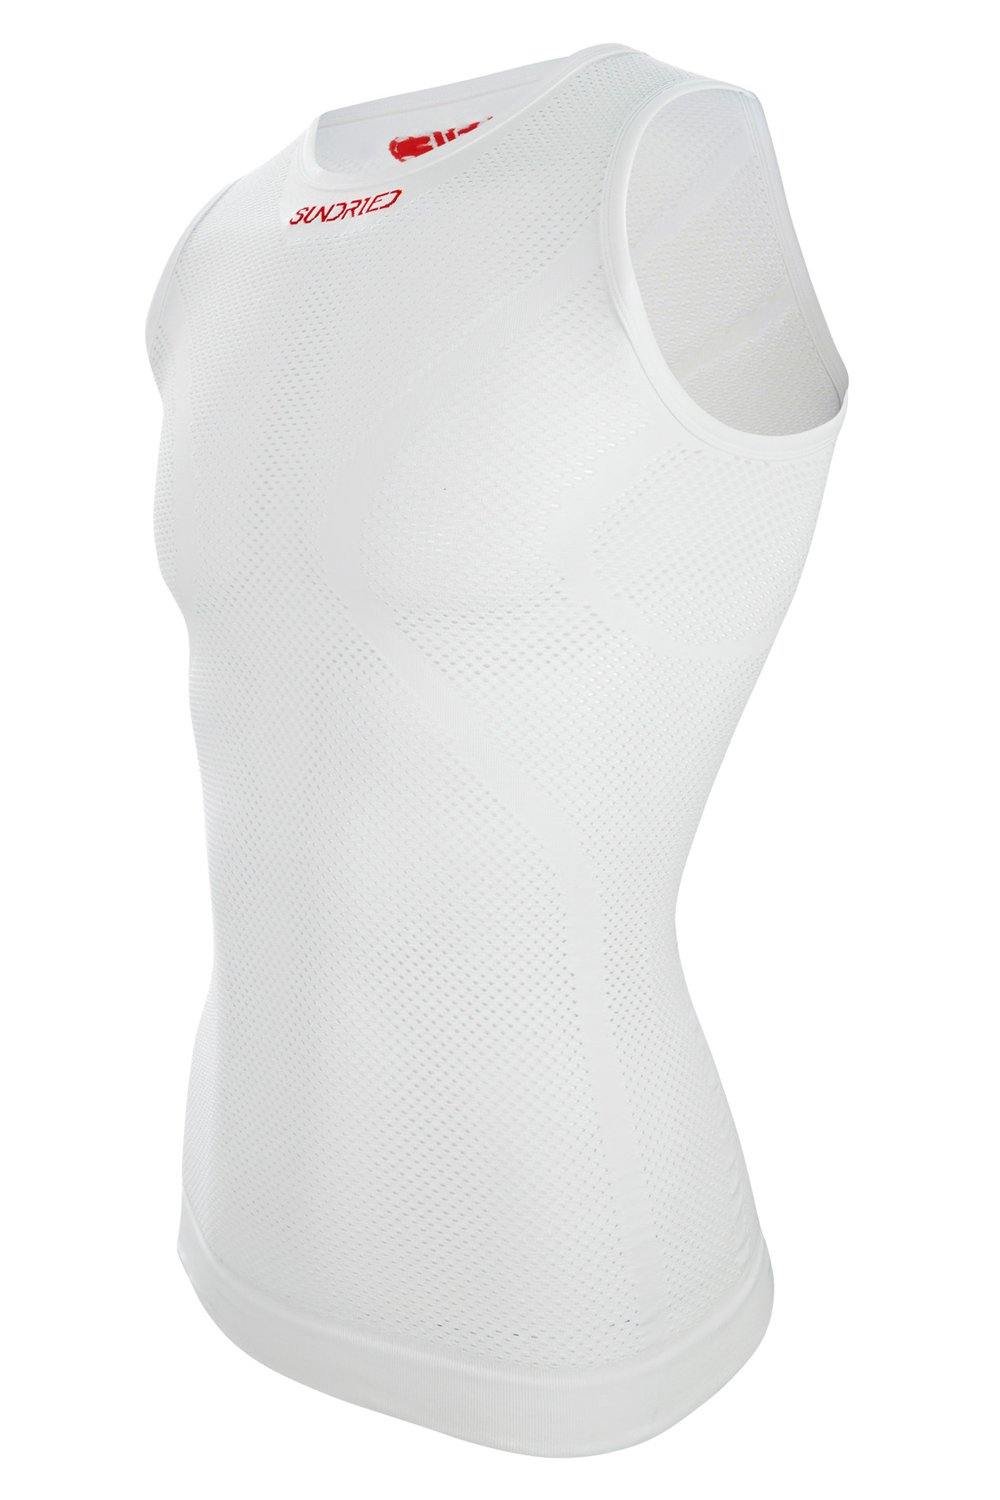 Sundried Thermal Cycling Vest Baselayer S/M White SD0313 S White Activewear